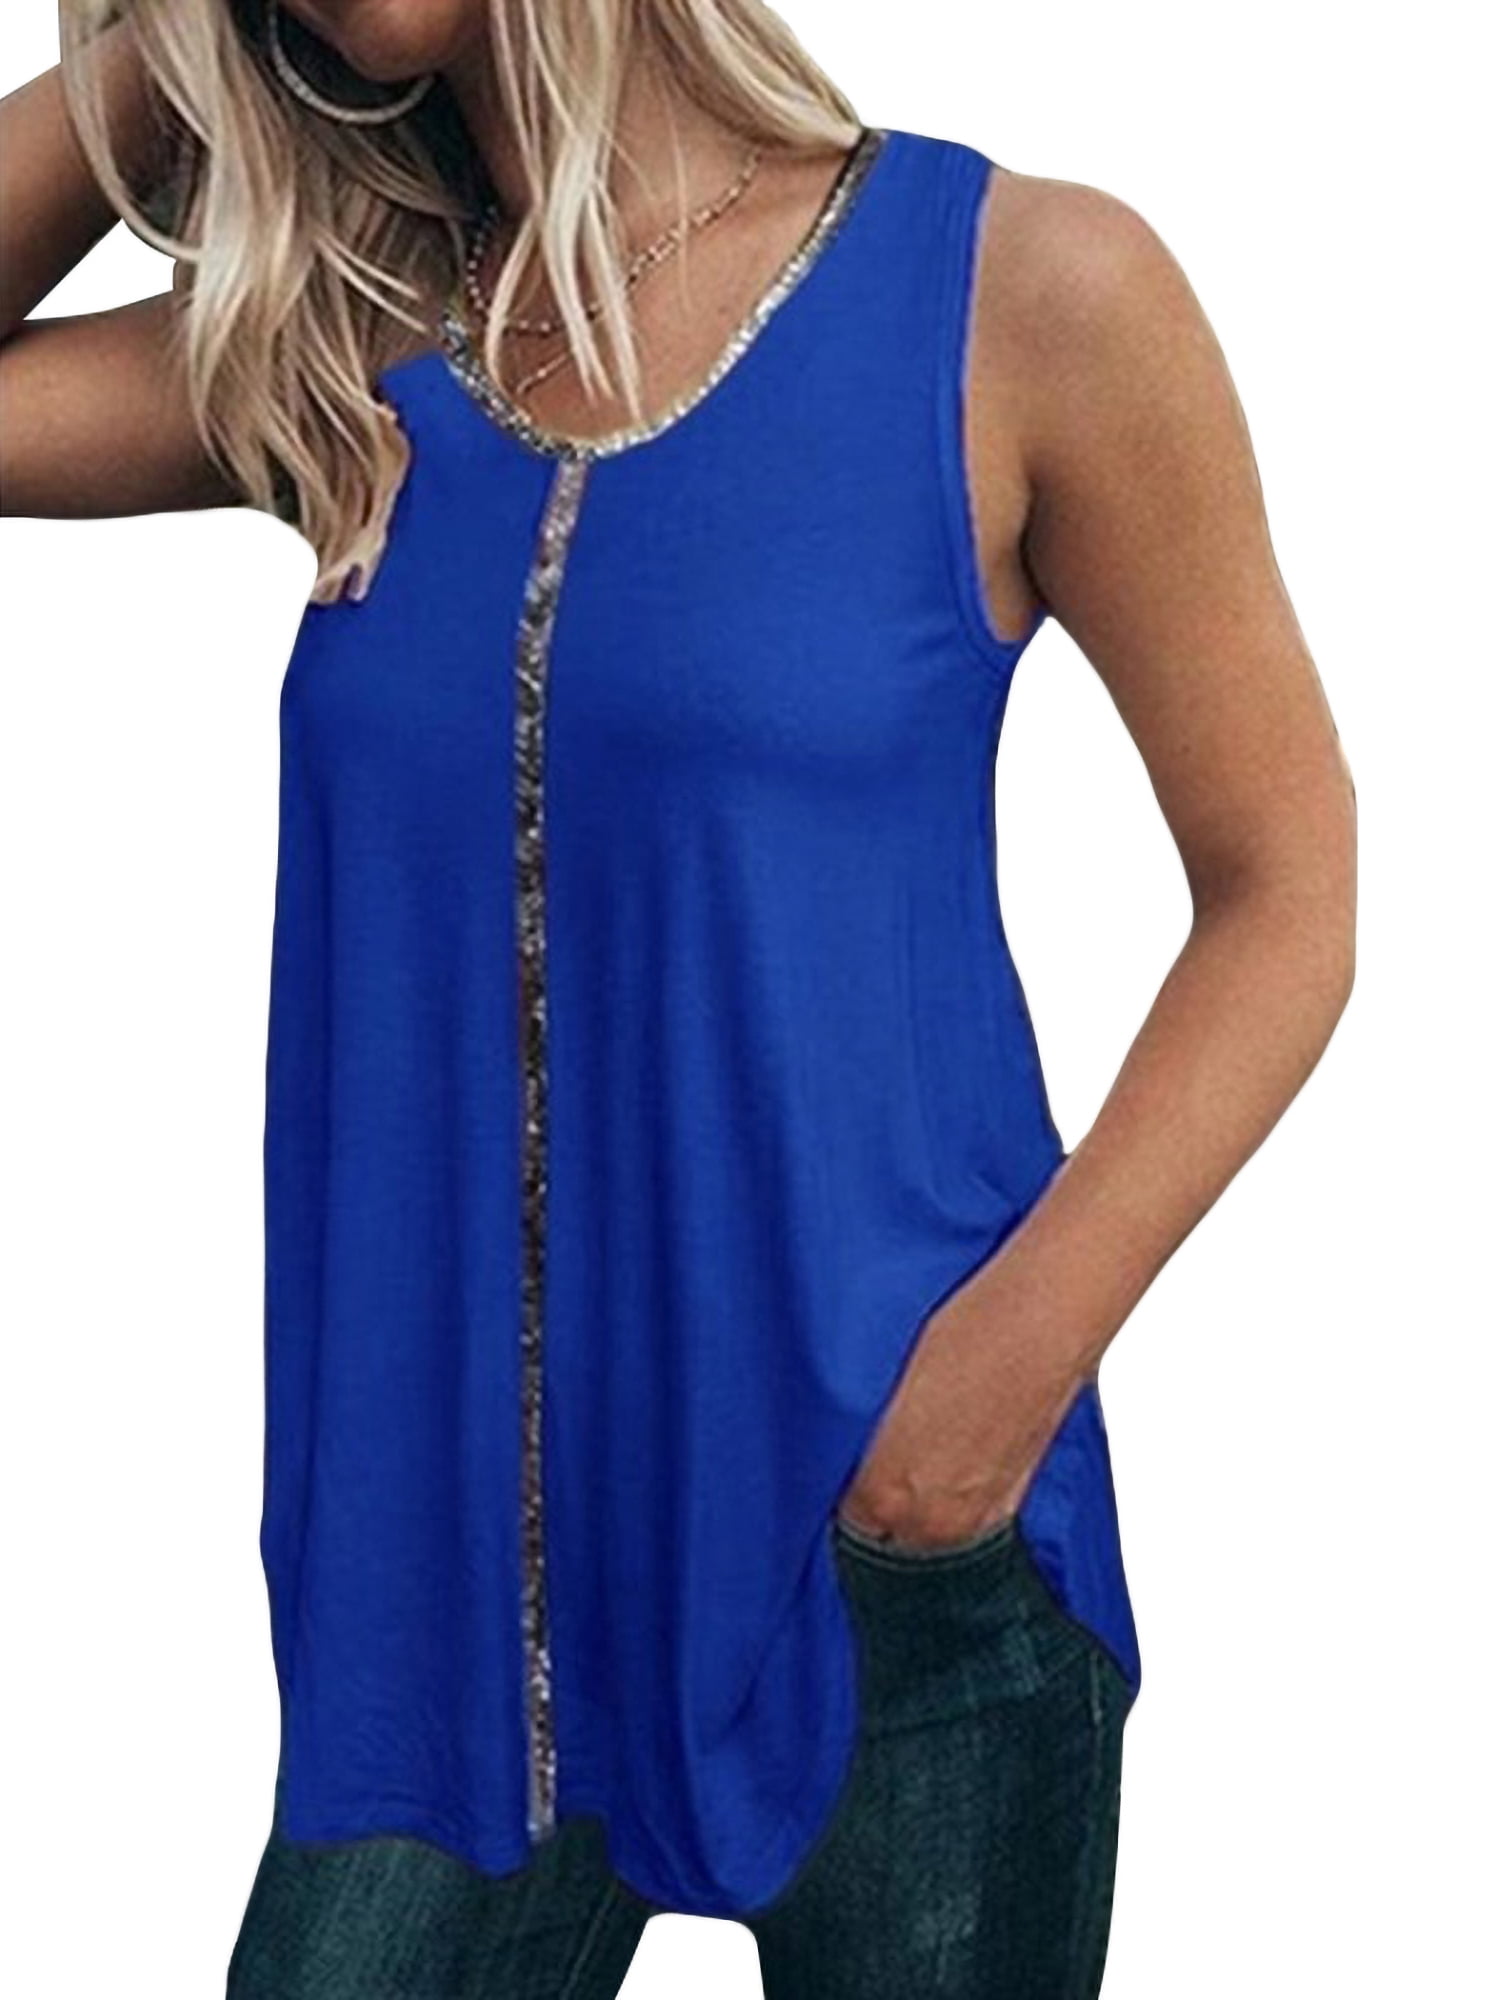 Wind Goal Women Casual Knit Sleeveless Tops V Neck Pleated Tunic Tops Shirts Blouse 